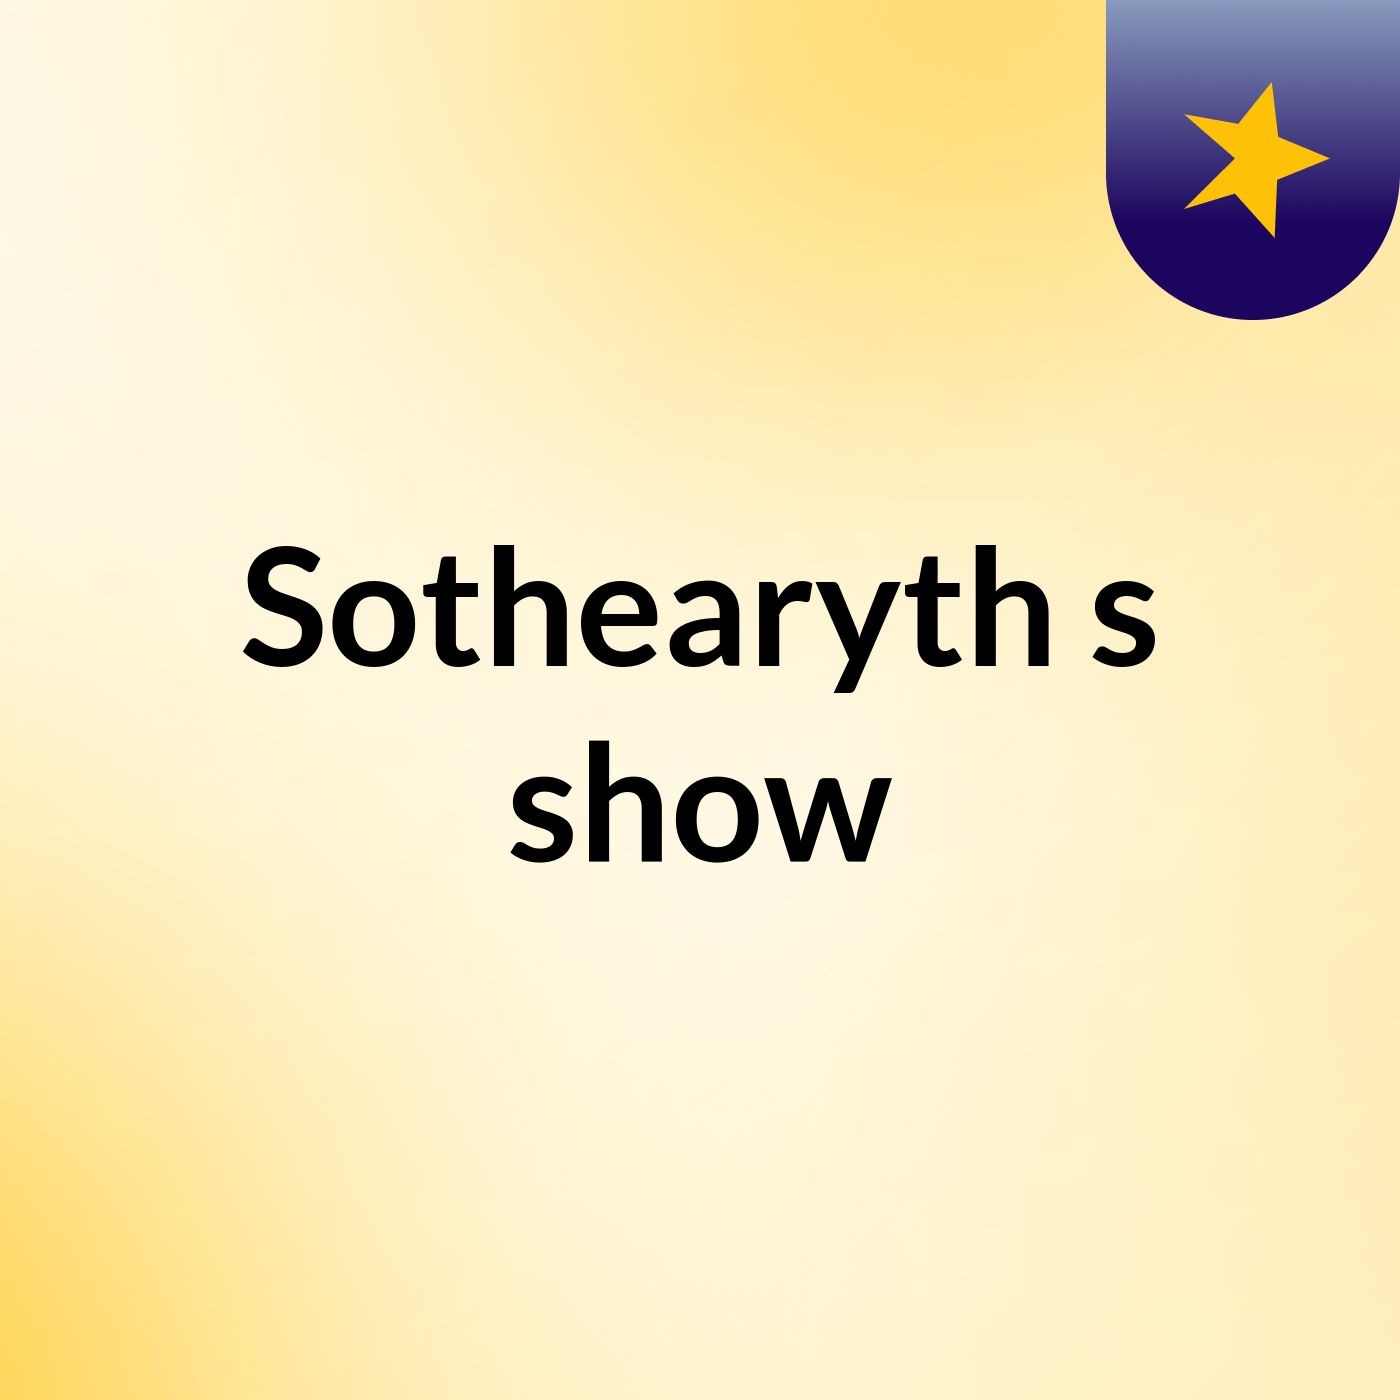 Sothearyth's show